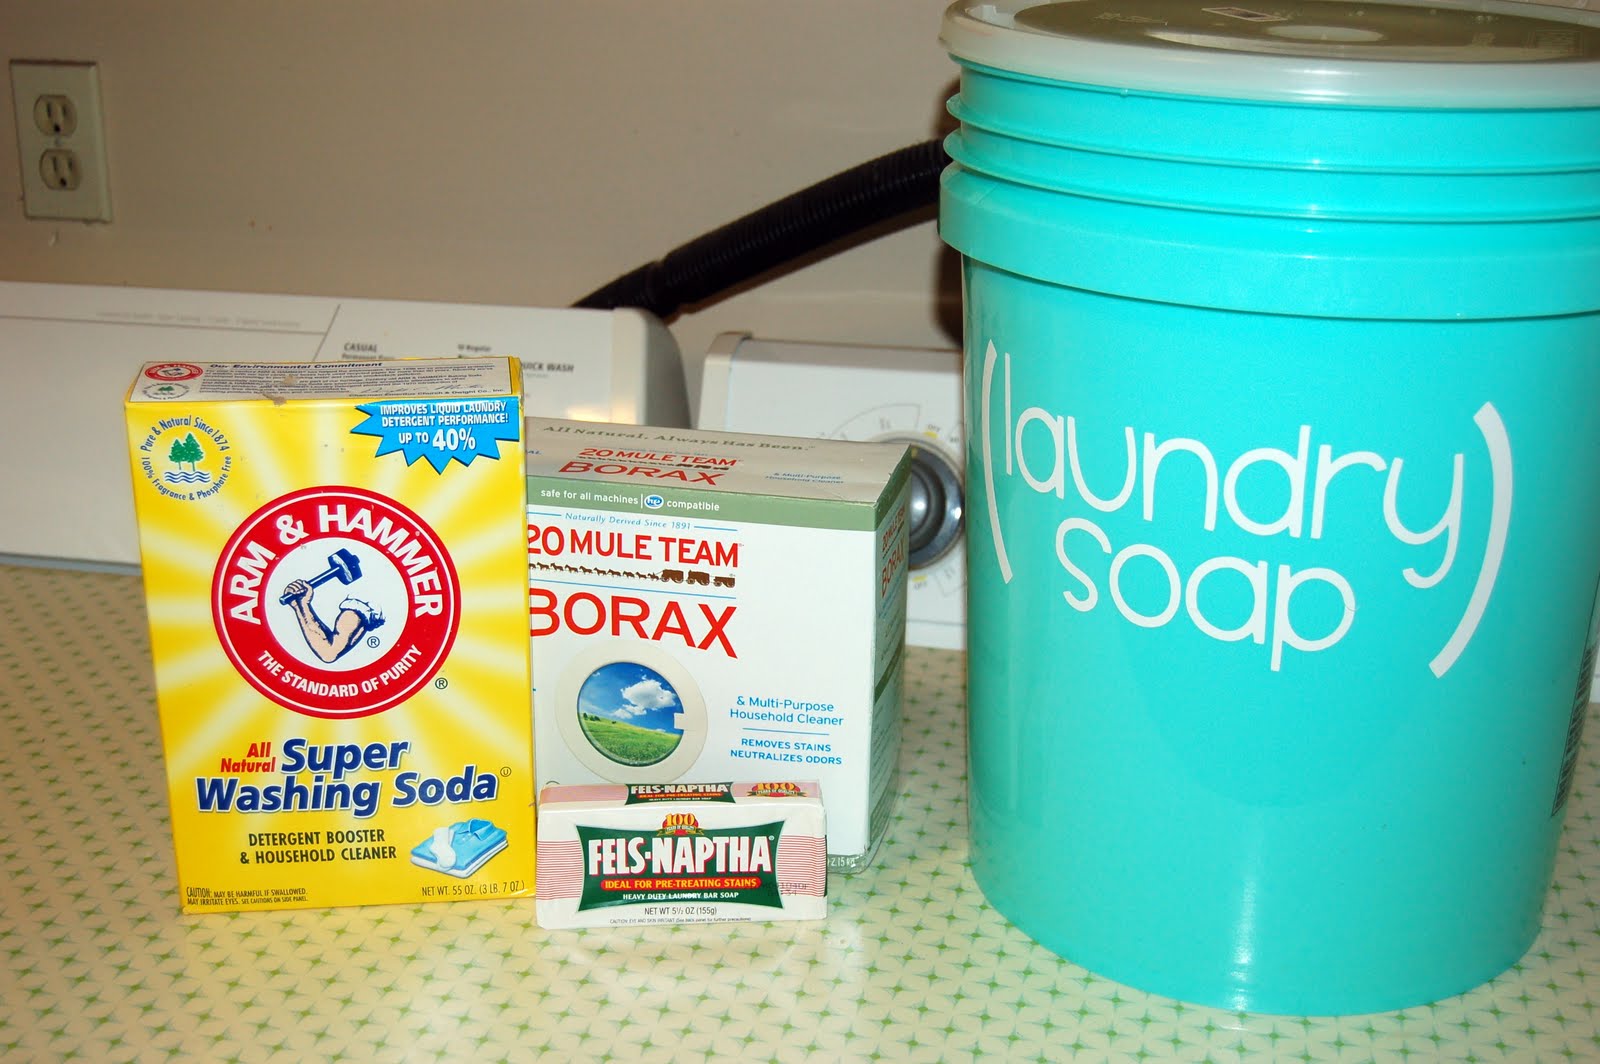 How to Make DIY Laundry Detergent at Home